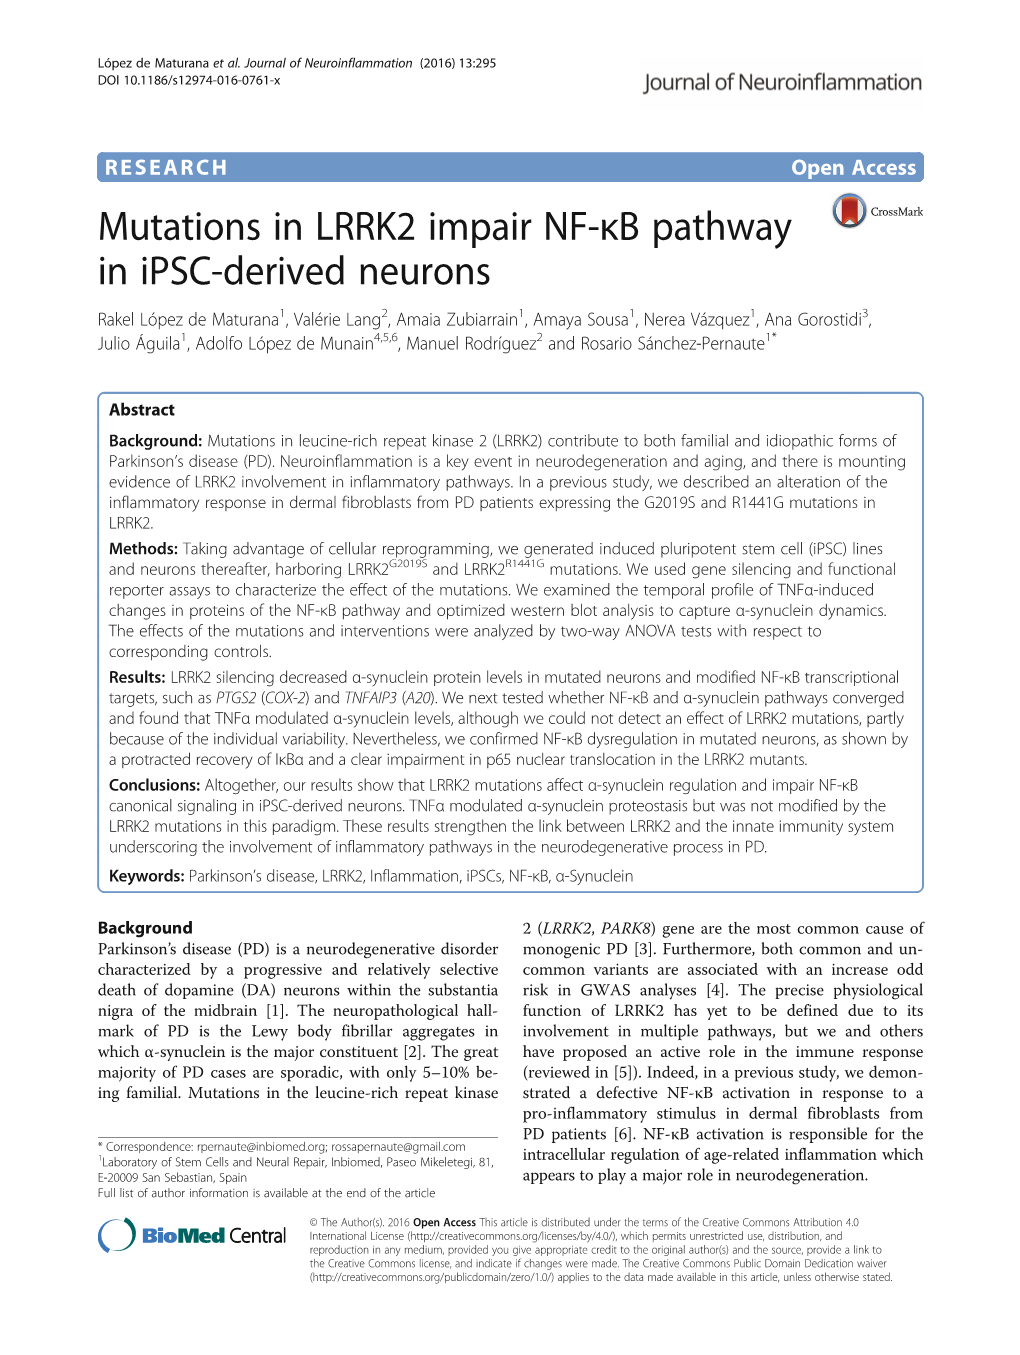 Mutations in LRRK2 Impair NF-Κb Pathway in Ipsc-Derived Neurons